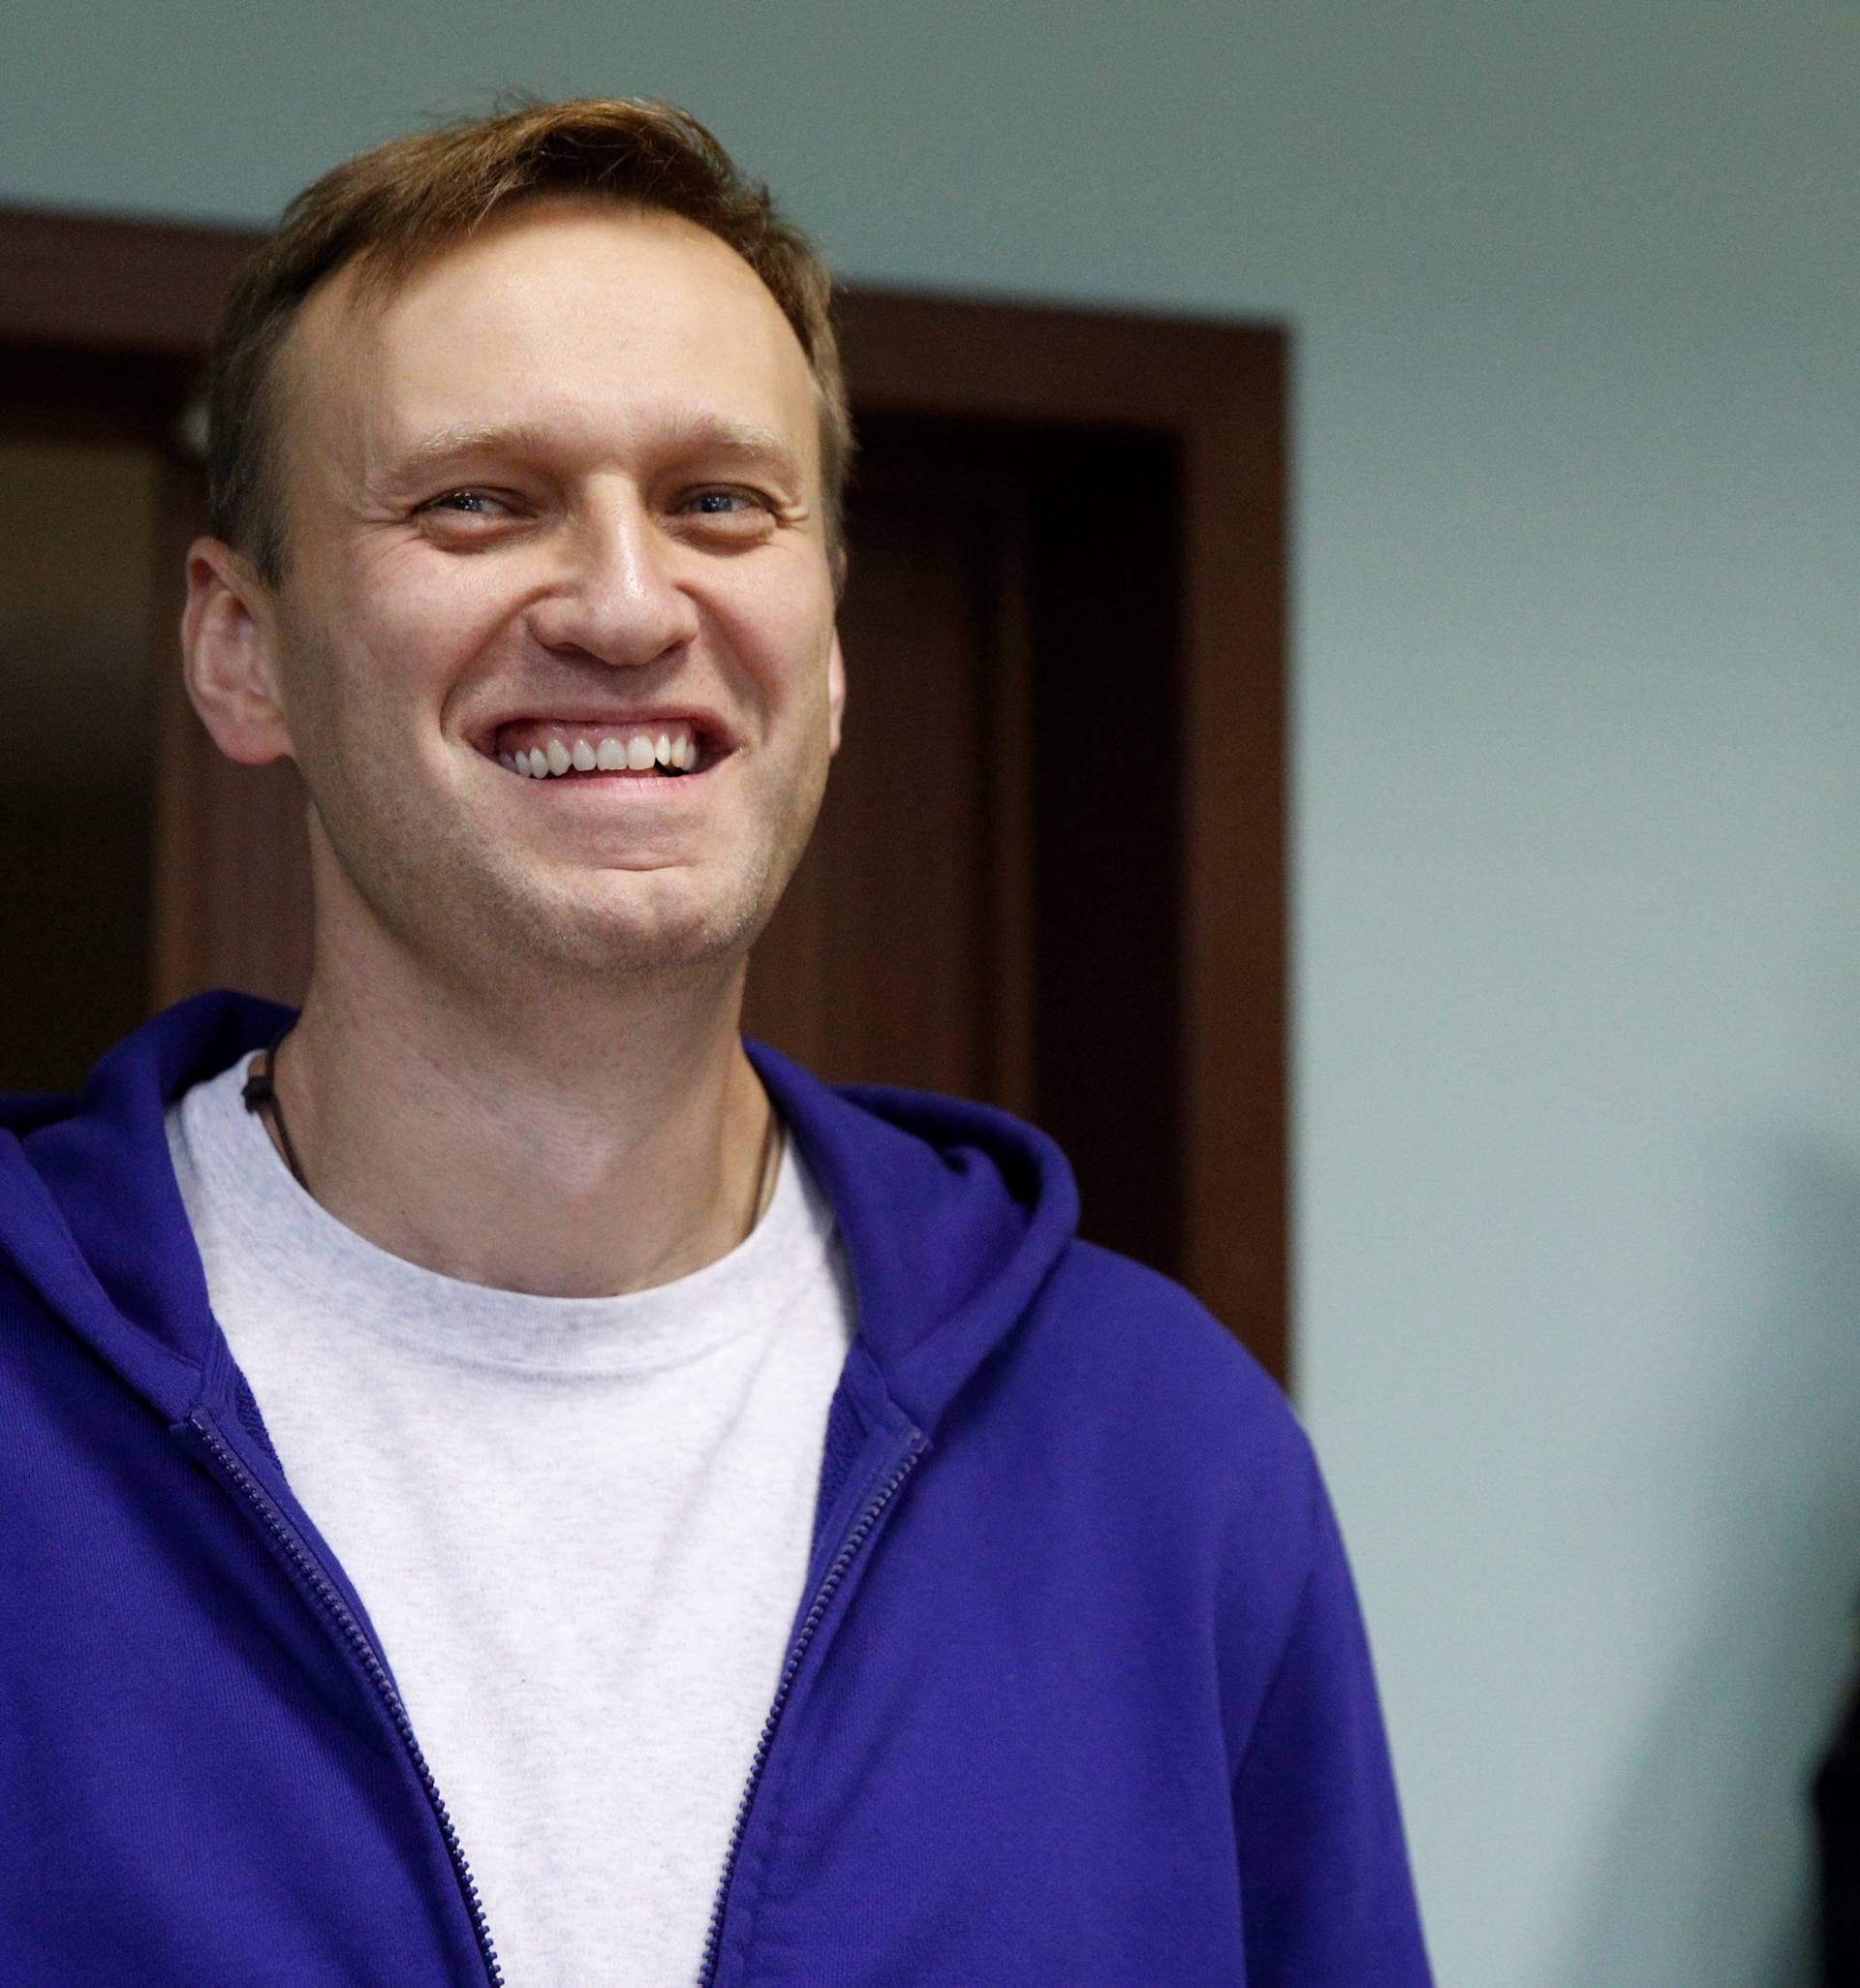 Russian opposition leader Alexei Navalny attends an appeal against his jail for repeatedly violating laws governing the organisation of public meetings and rallies, at Moscow city court in Moscow